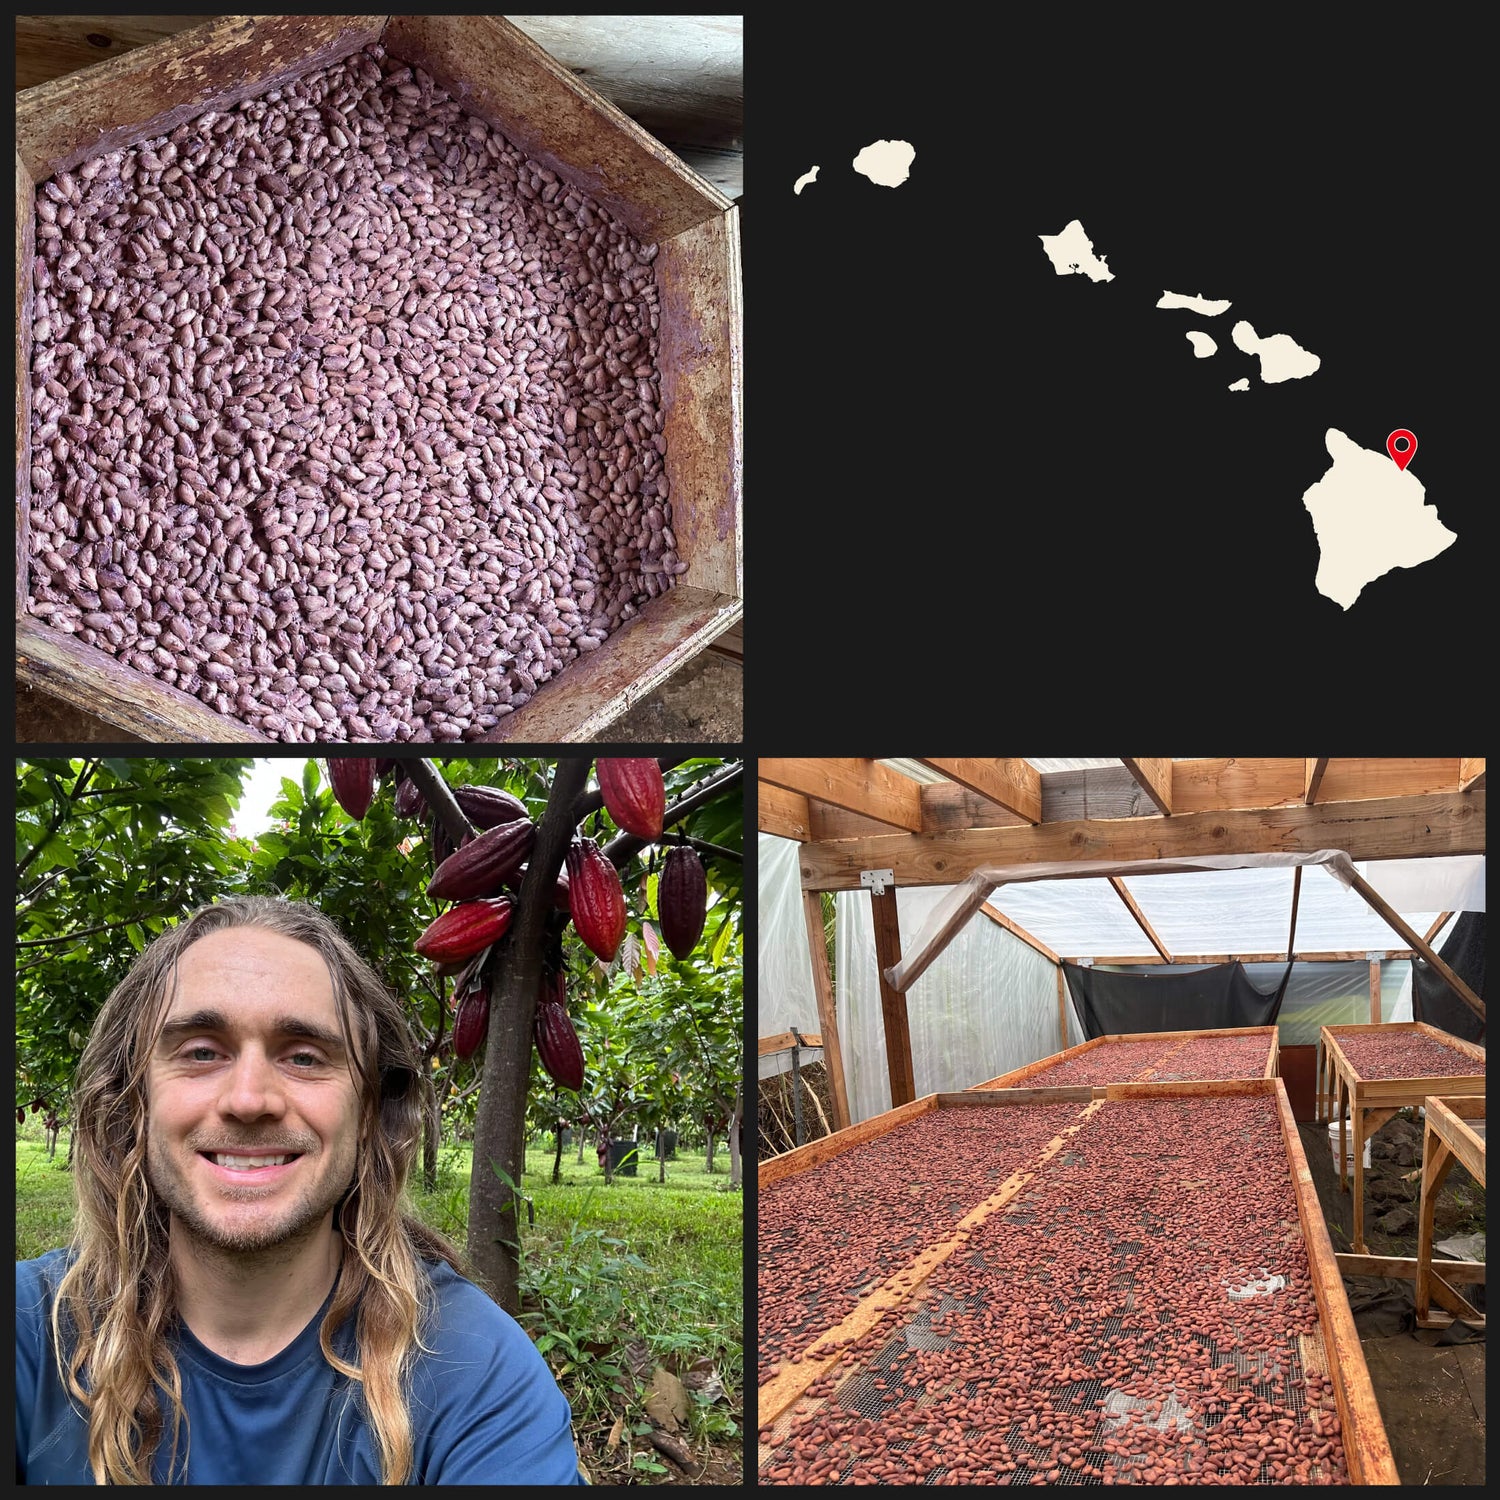 Images of cacao tree, dry cacao seeds and a map of the Hawaiian Islands